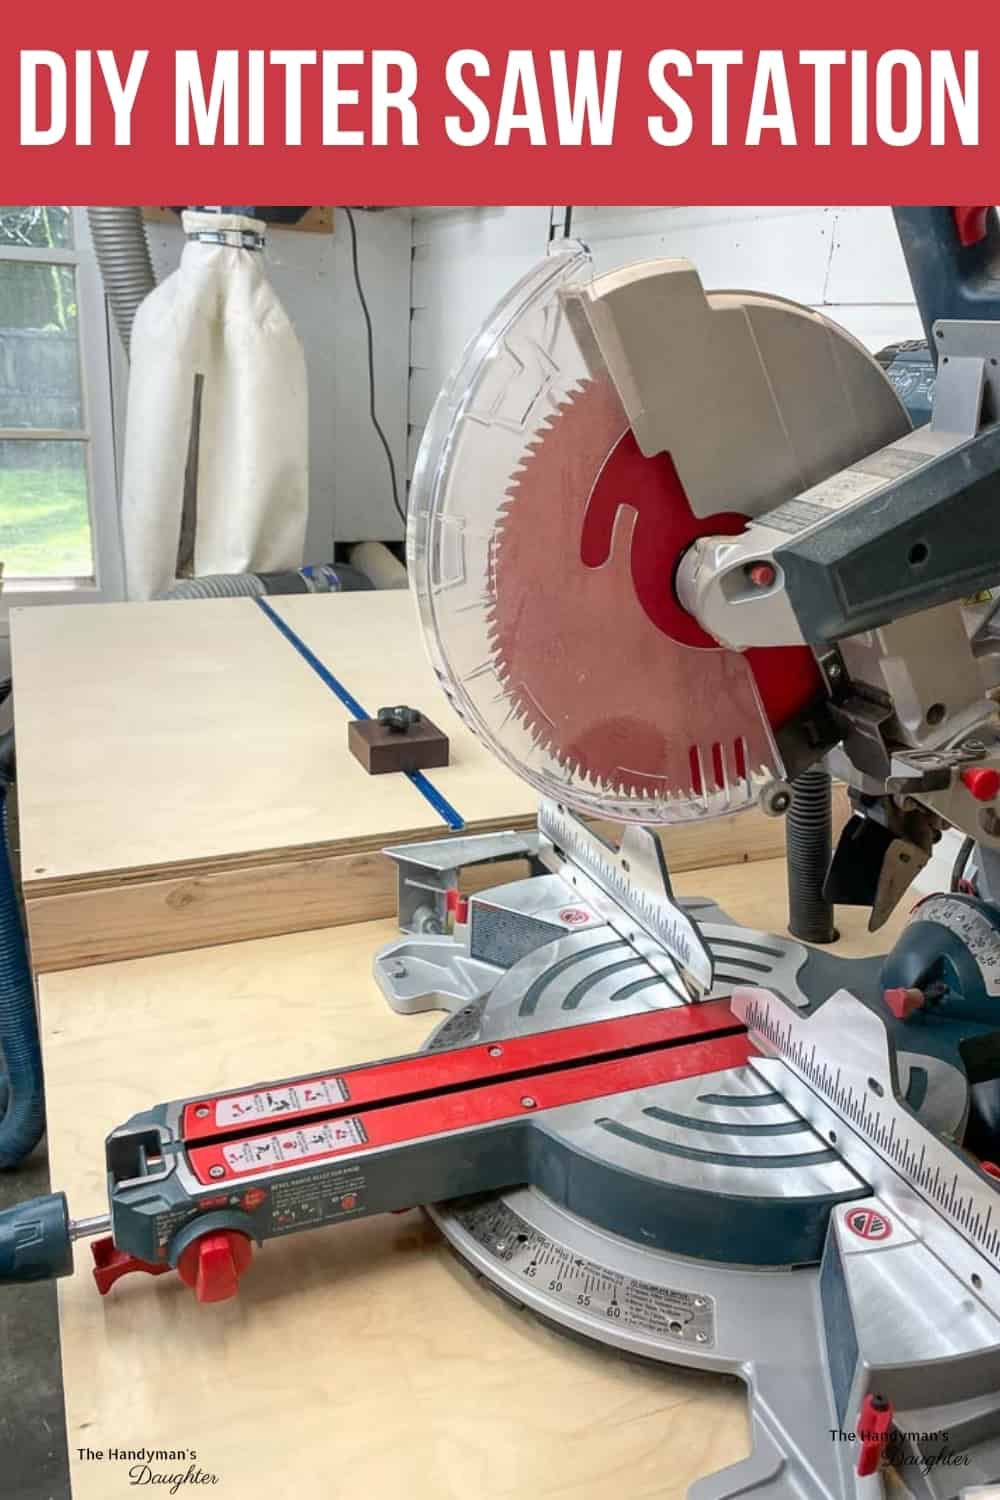 DIY miter saw station with plans